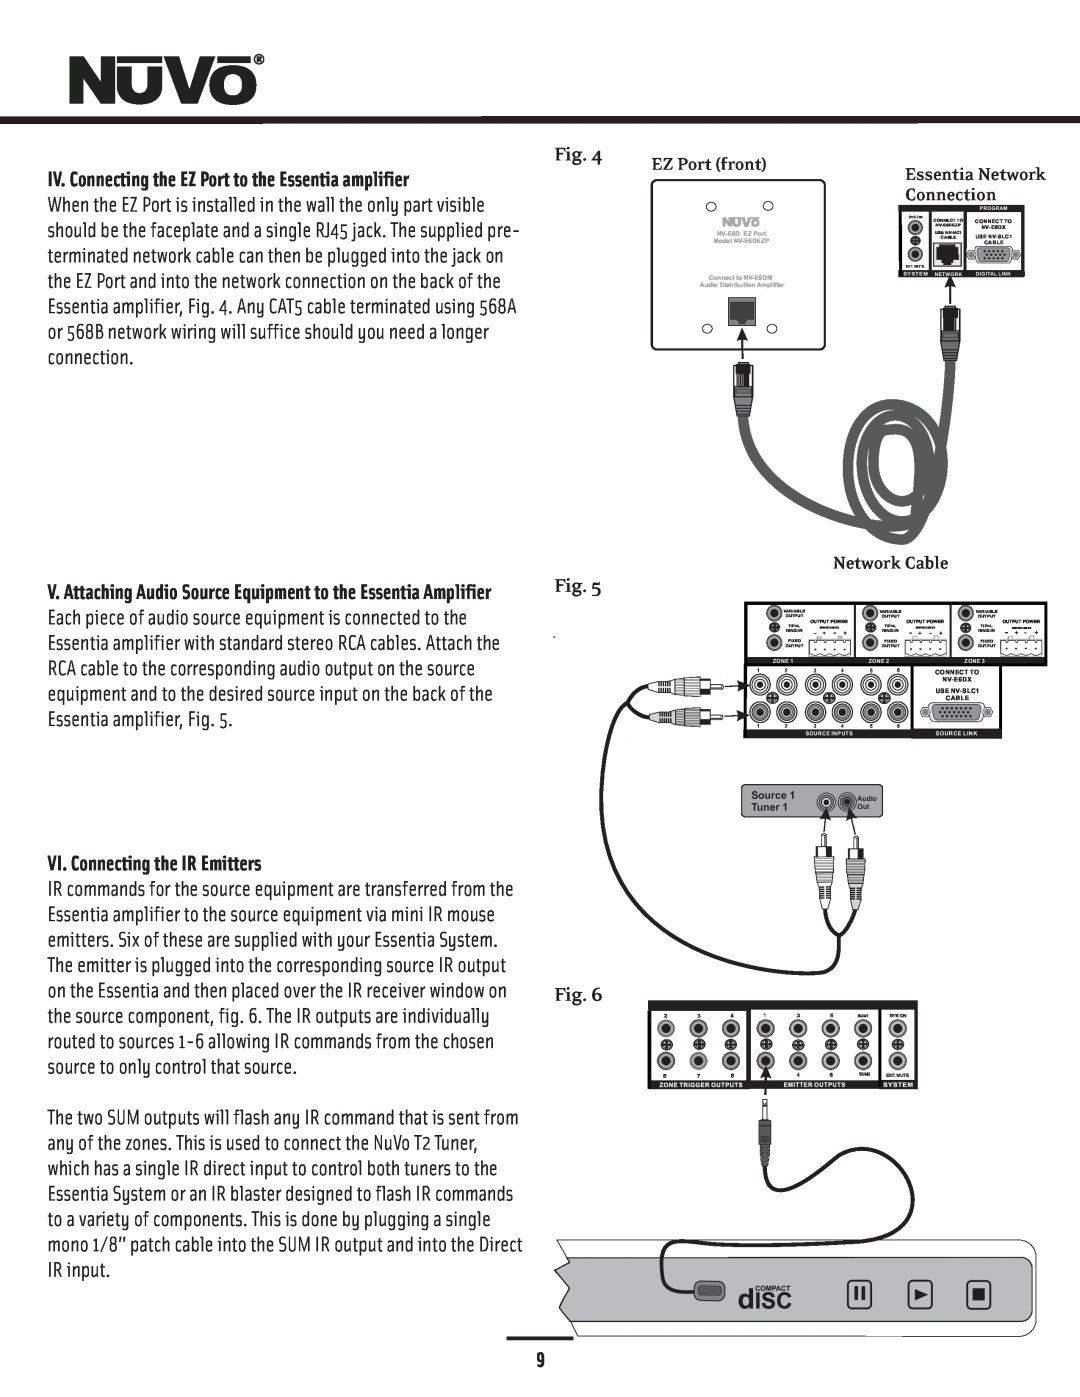 Nuvo NV-E6DMS-DC, NV-E6DXS-DC manual VI. Connecting the IR Emitters, EZ Port front, Connection, Network Cable 